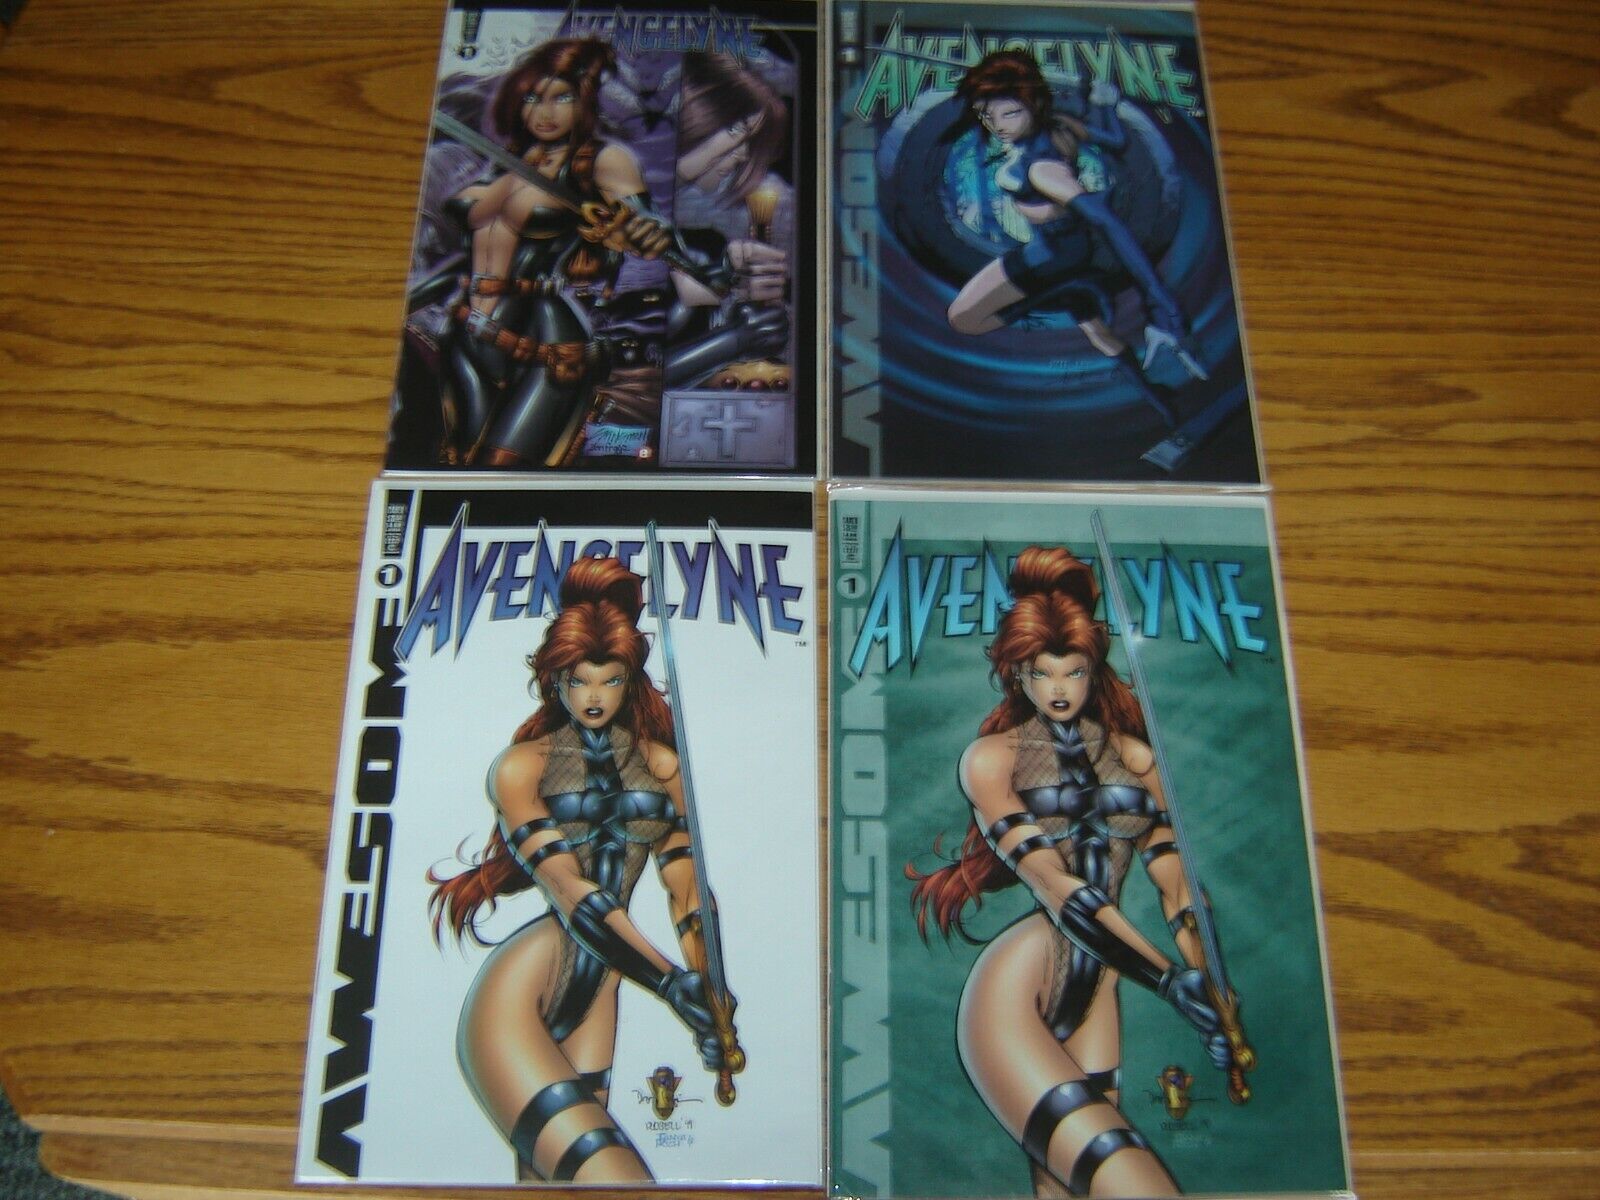 AVENGELYNE #1s (Lot of 4) White - Green - Variant - Pat Lee 1999 Awesome SEXY